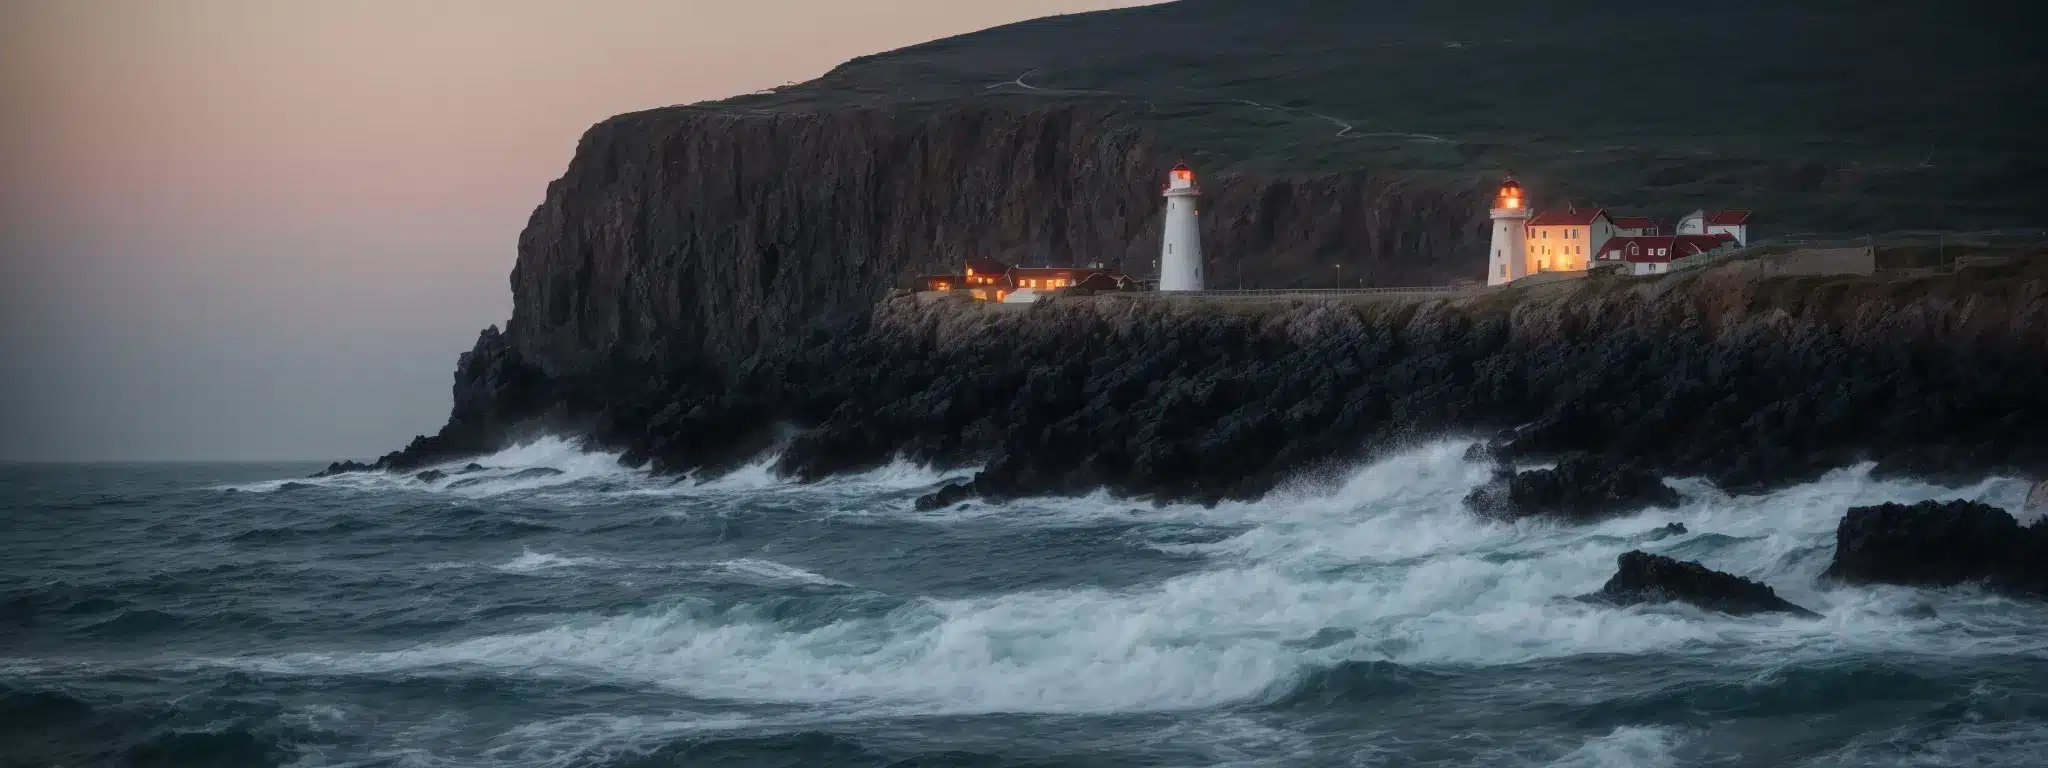 A Gleaming Lighthouse Towers Above The Rocky Coast, Its Light Piercing Through The Twilight To Guide Ships Safely Home.